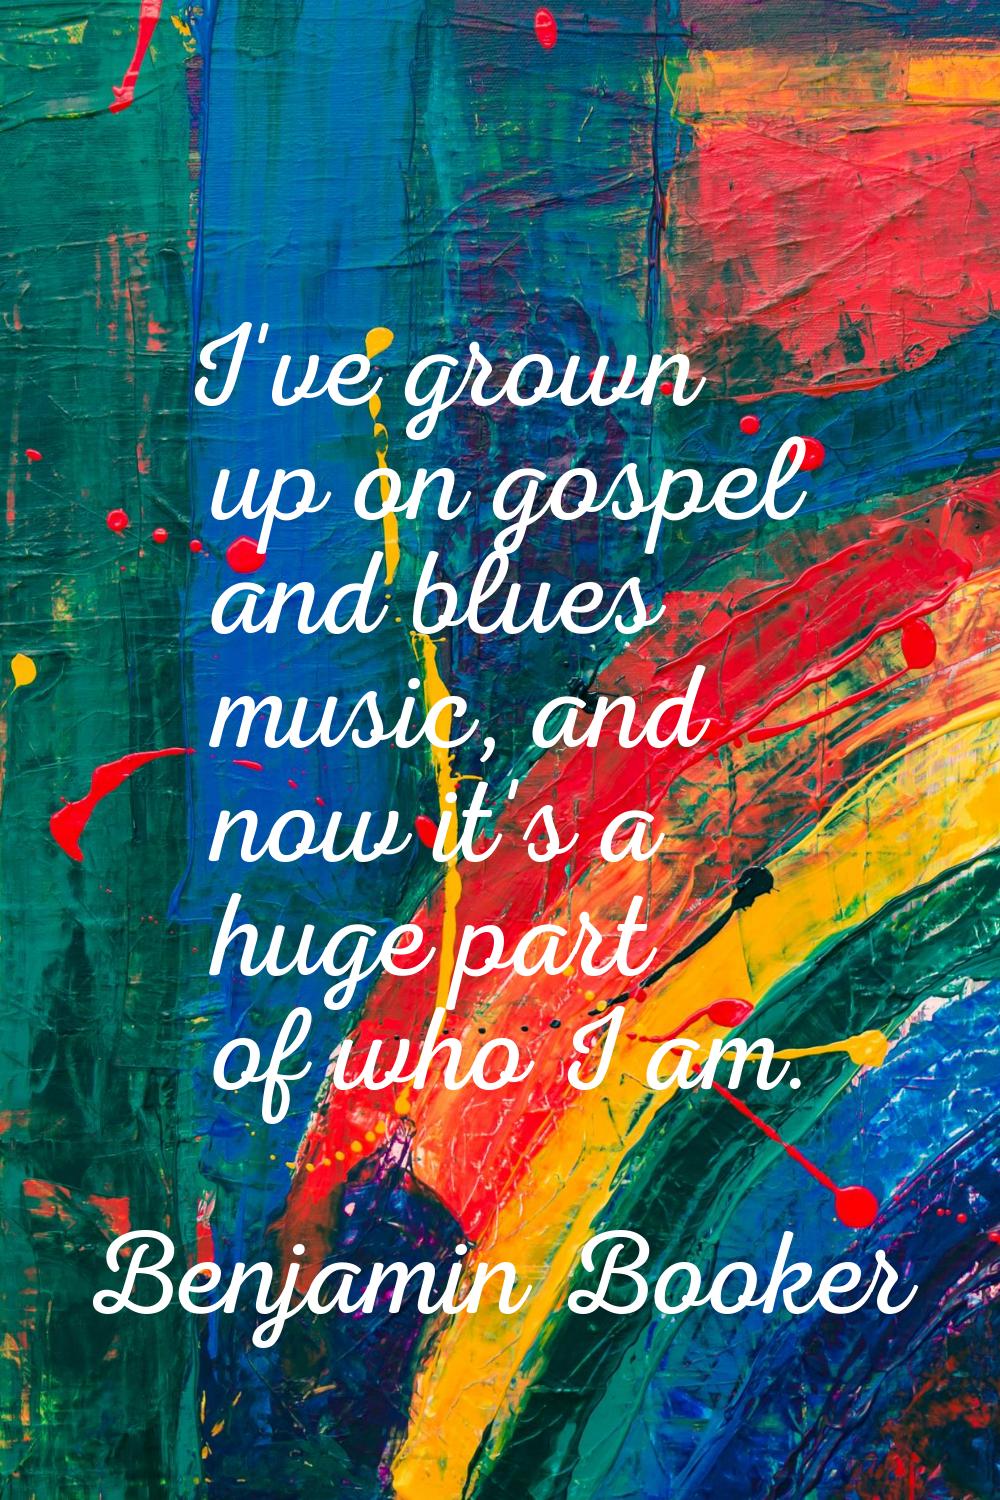 I've grown up on gospel and blues music, and now it's a huge part of who I am.